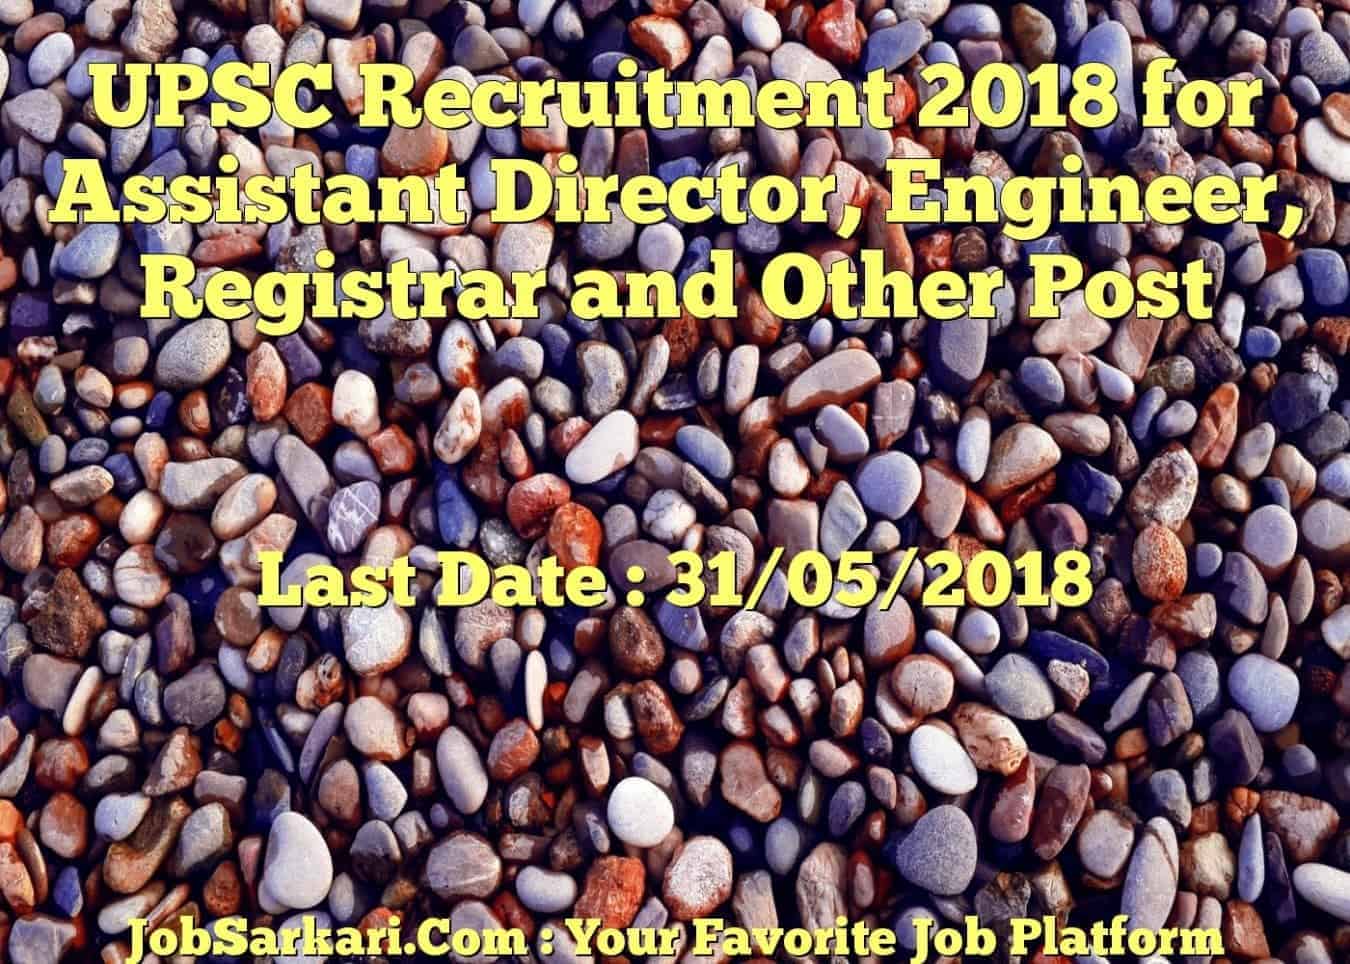 UPSC Recruitment 2018 for Assistant Director, Engineer, Registrar and Other Post